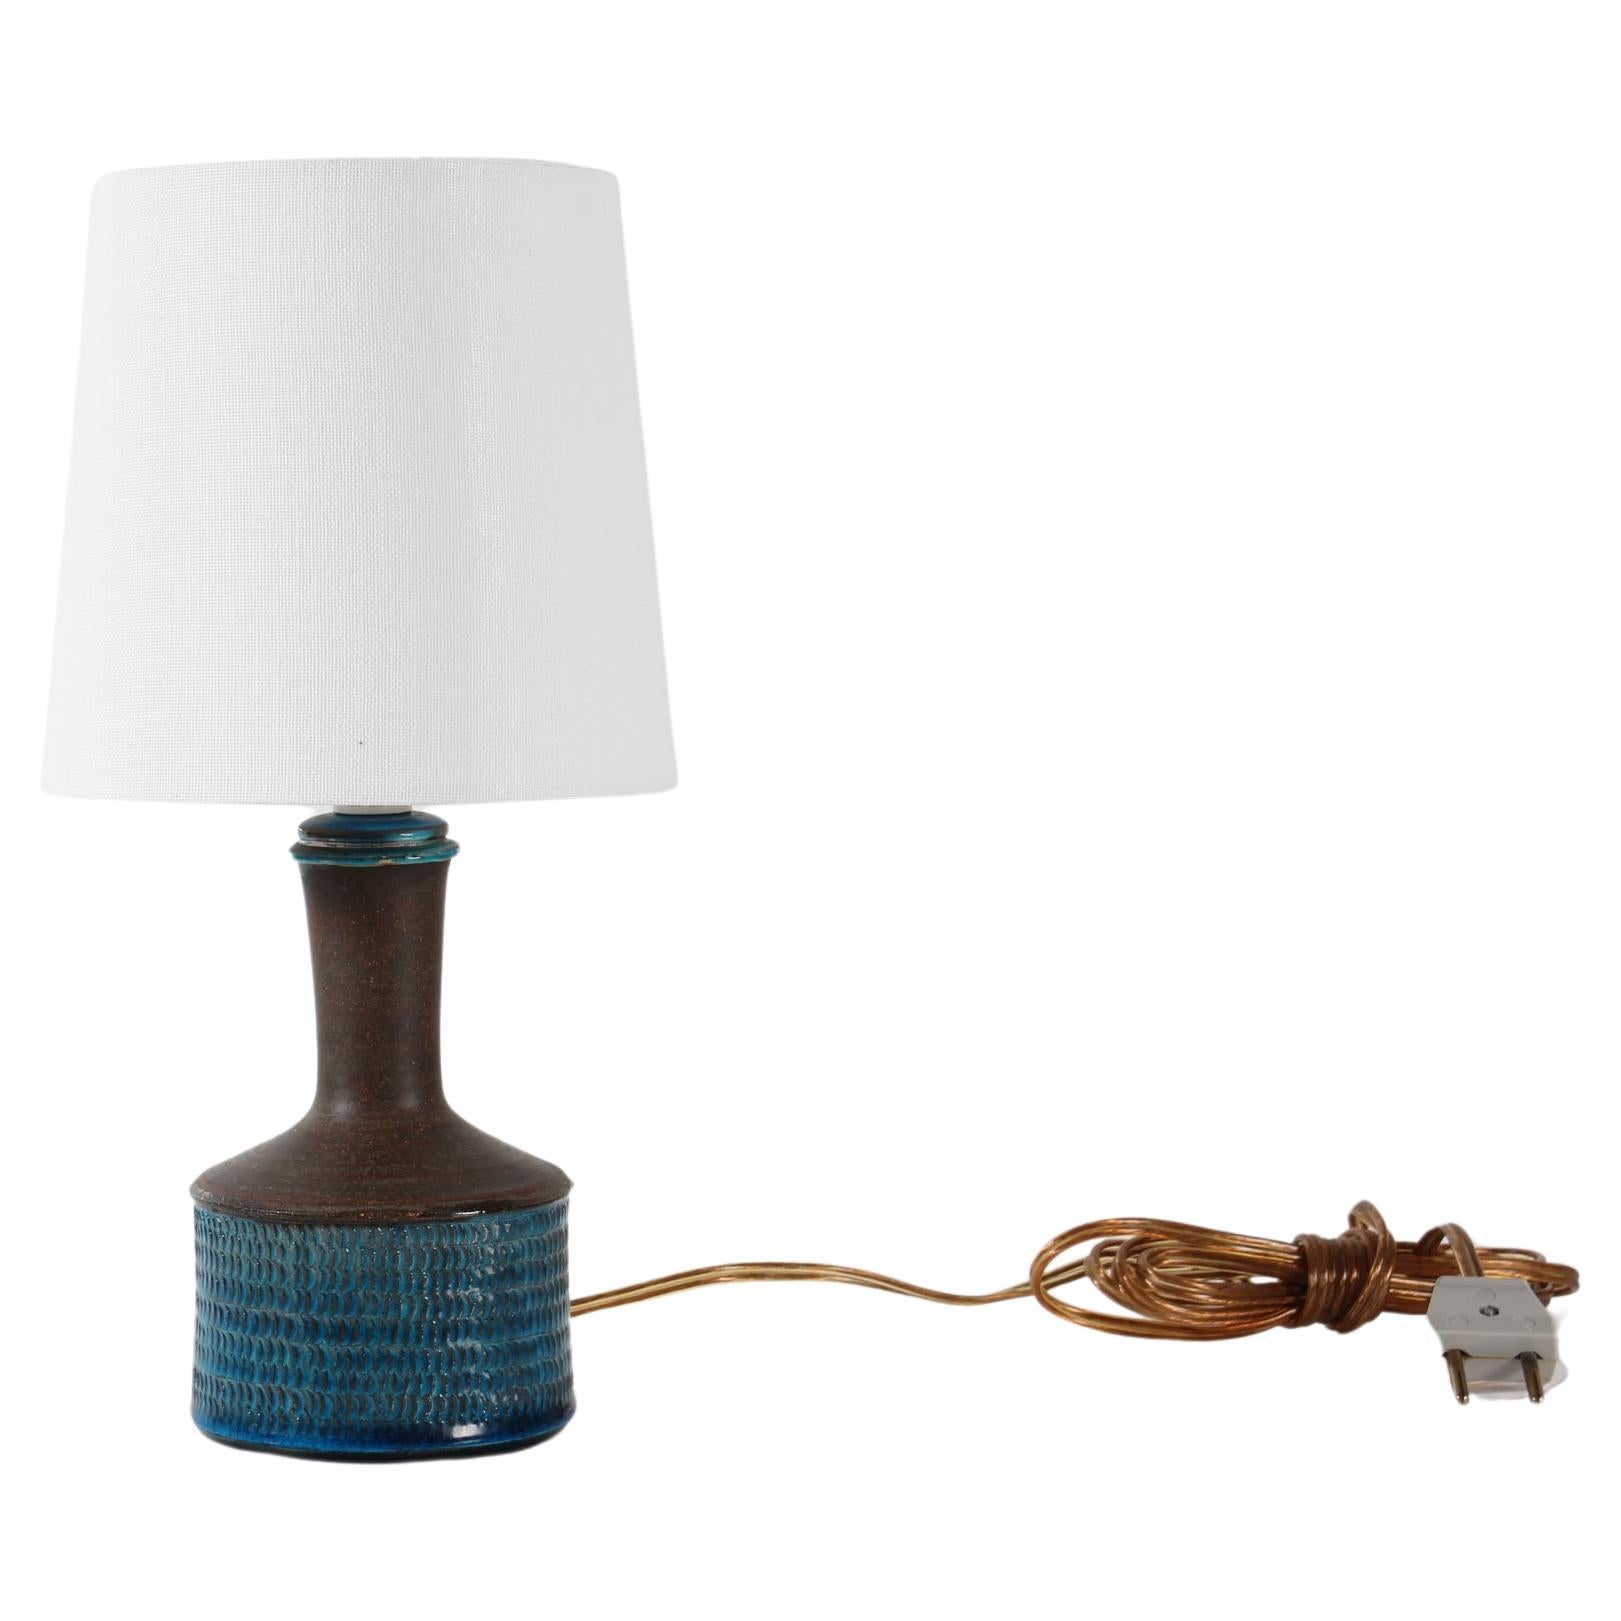 Small mid-century Danish table- and bedside lamp.
it's designed by Nils Kähler for the ceramic workshop Kähler (HAK) in Denmark in the 1970s

It's decorated with a glossy turquoise blue glaze on a structured surface. The neck is smooth and